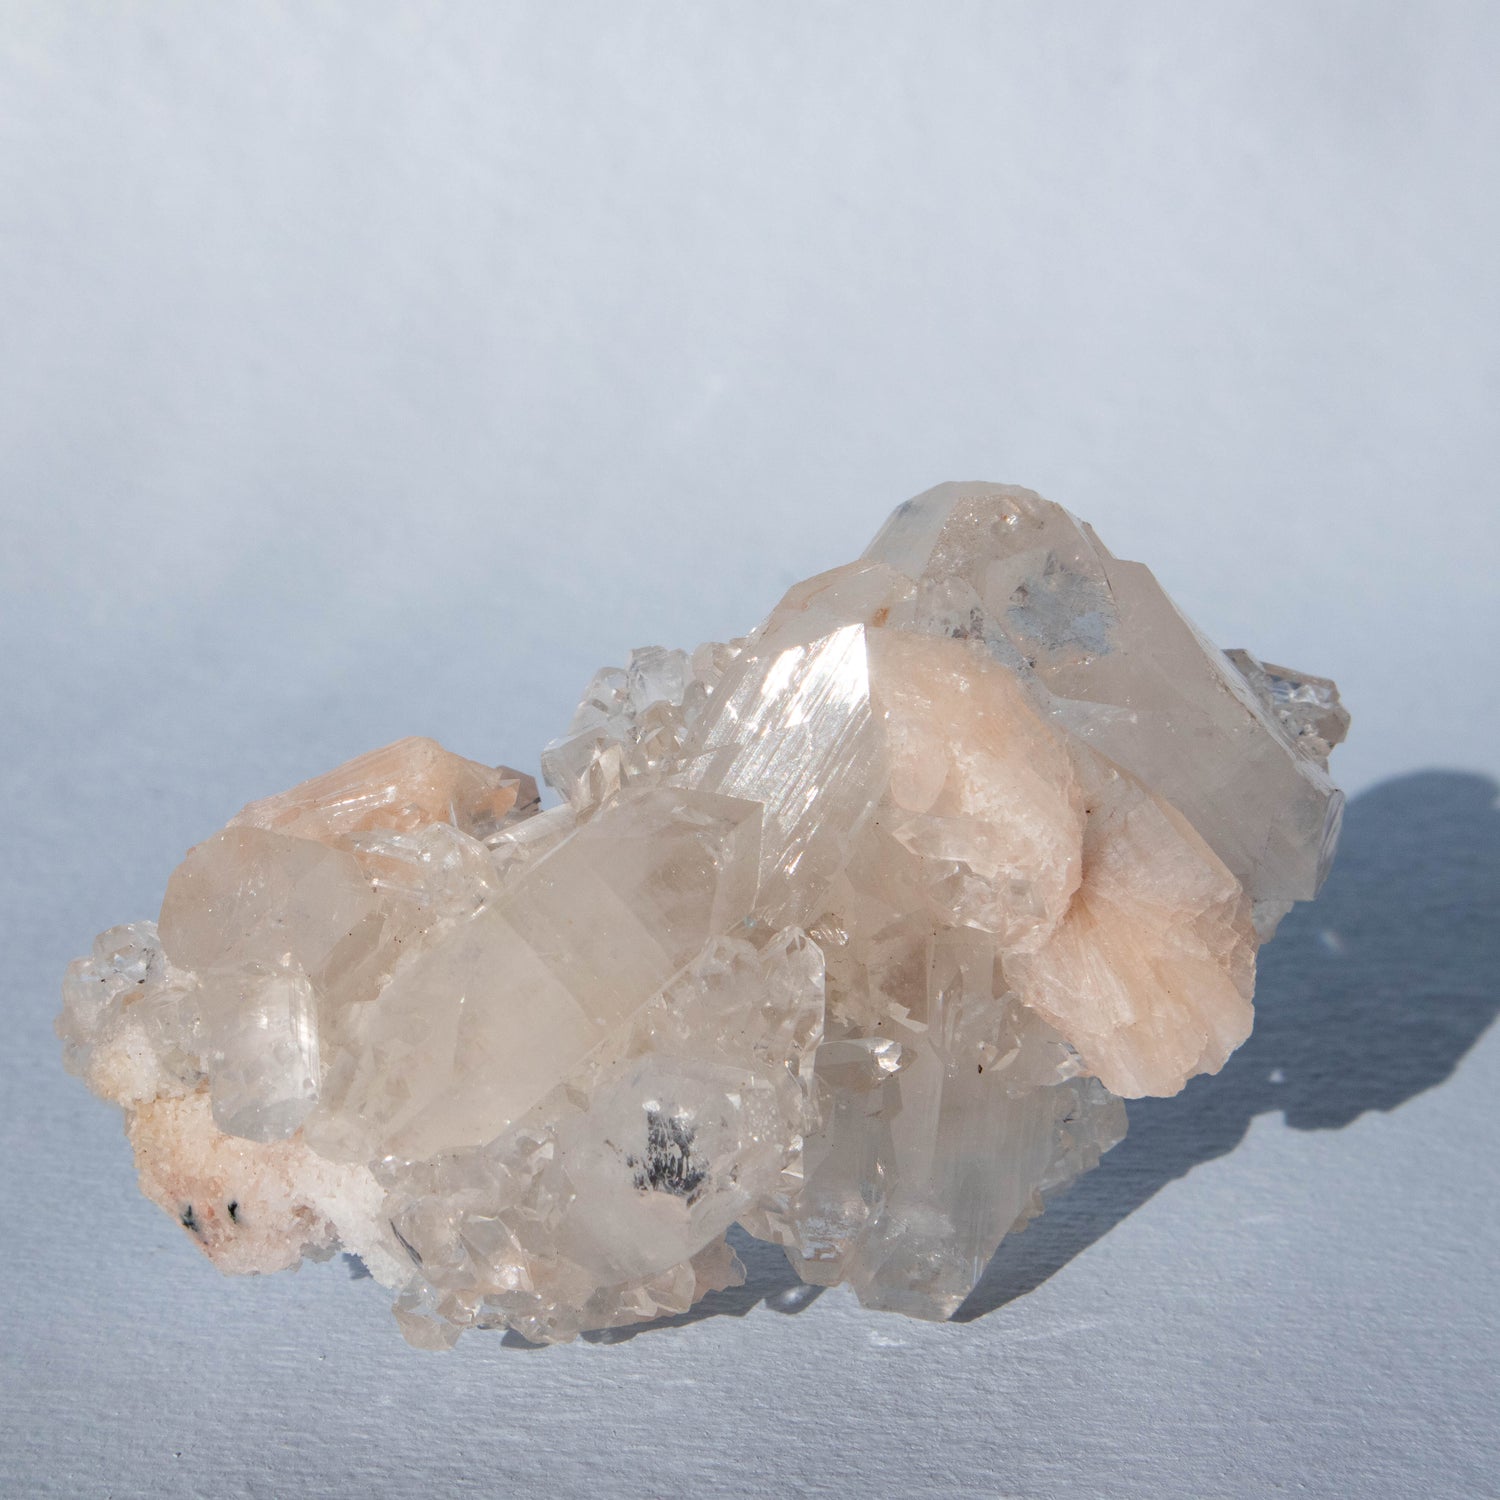 apophyllite, apophyllite cluster, apophyllite specimen, raw apophyllite specimen, raw apophyllite specimen, diamond apophyllite cluster, crystal specimen, raw crystal, raw crystal specimen, gemstone specimen, apophyllite crystal, apophyllite stone, apophyllite properties, apophyllite healing properties, apophyllite metaphysical properties, apophyllite meaning